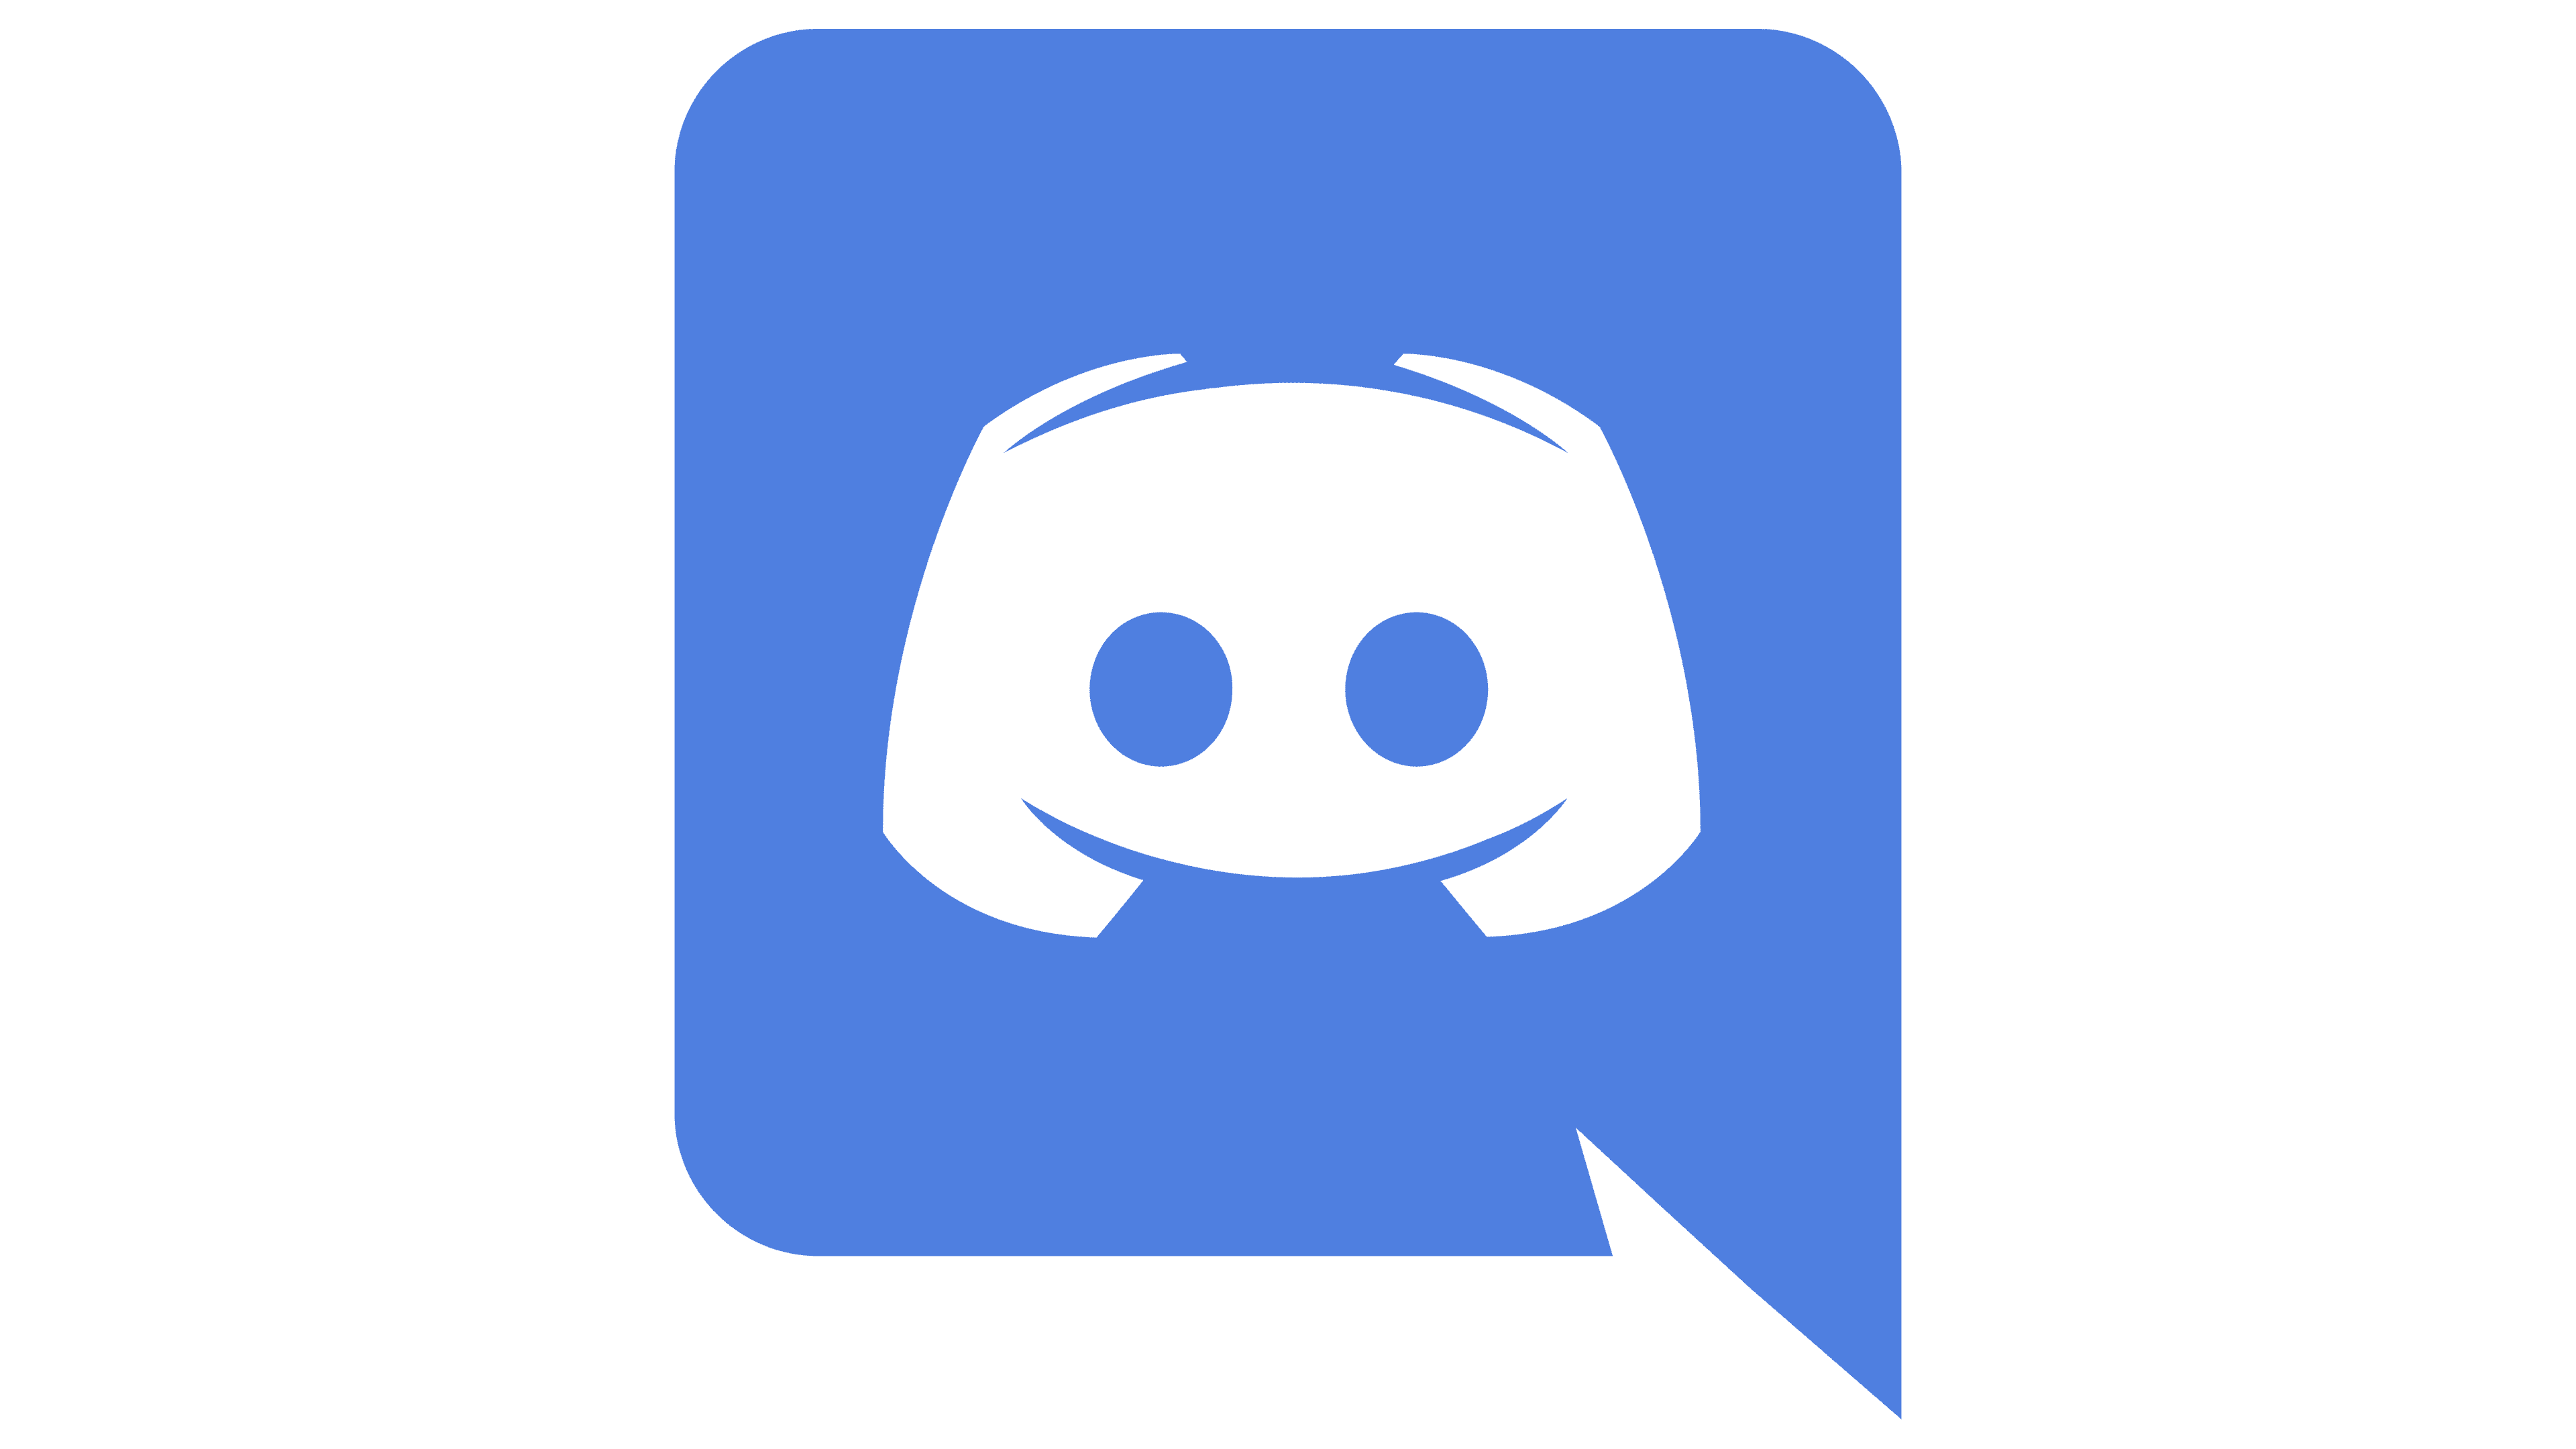 different text styles discord